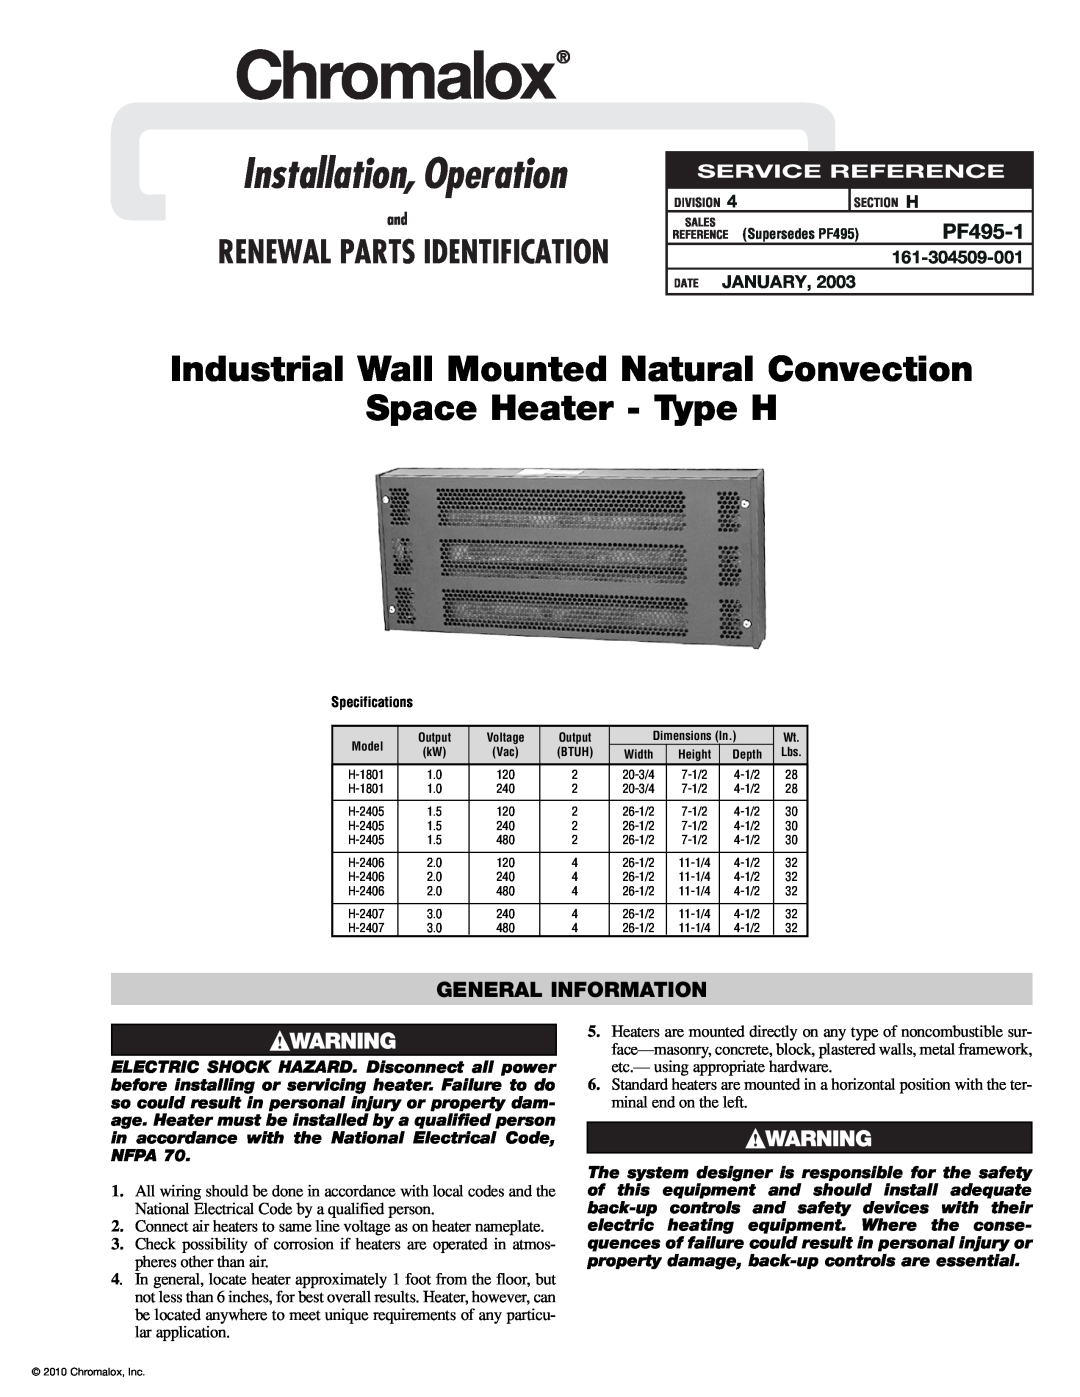 Chromalox PF495-1 specifications General Information, Installation, Operation, Industrial Wall Mounted Natural Convection 